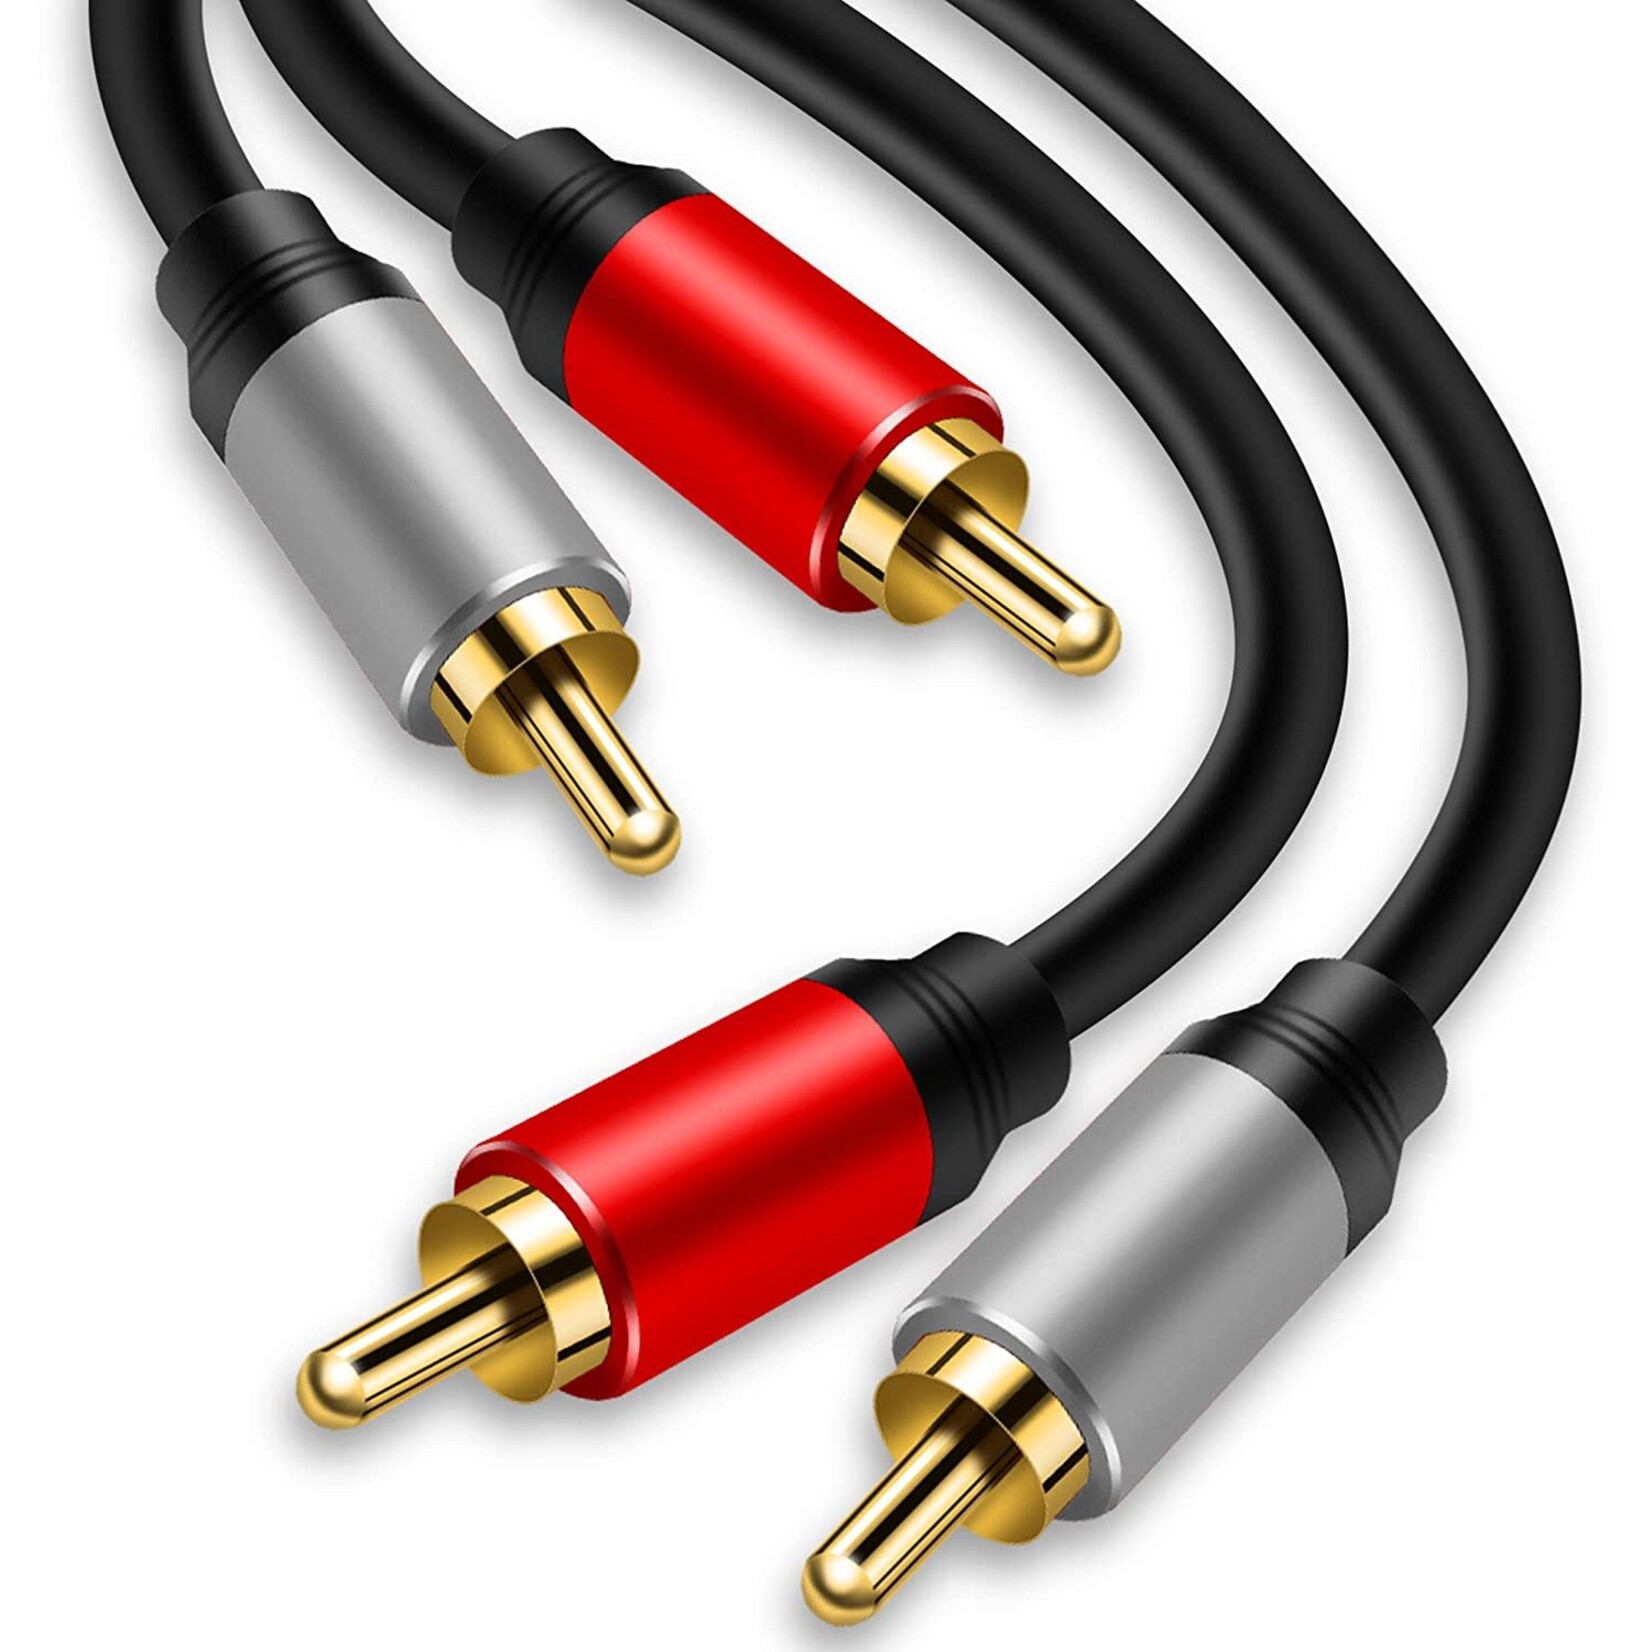 Roxtone Roxtone G-Series Dual Rca Male To Dual Rca Male Cable 2M (6.56 Ft)